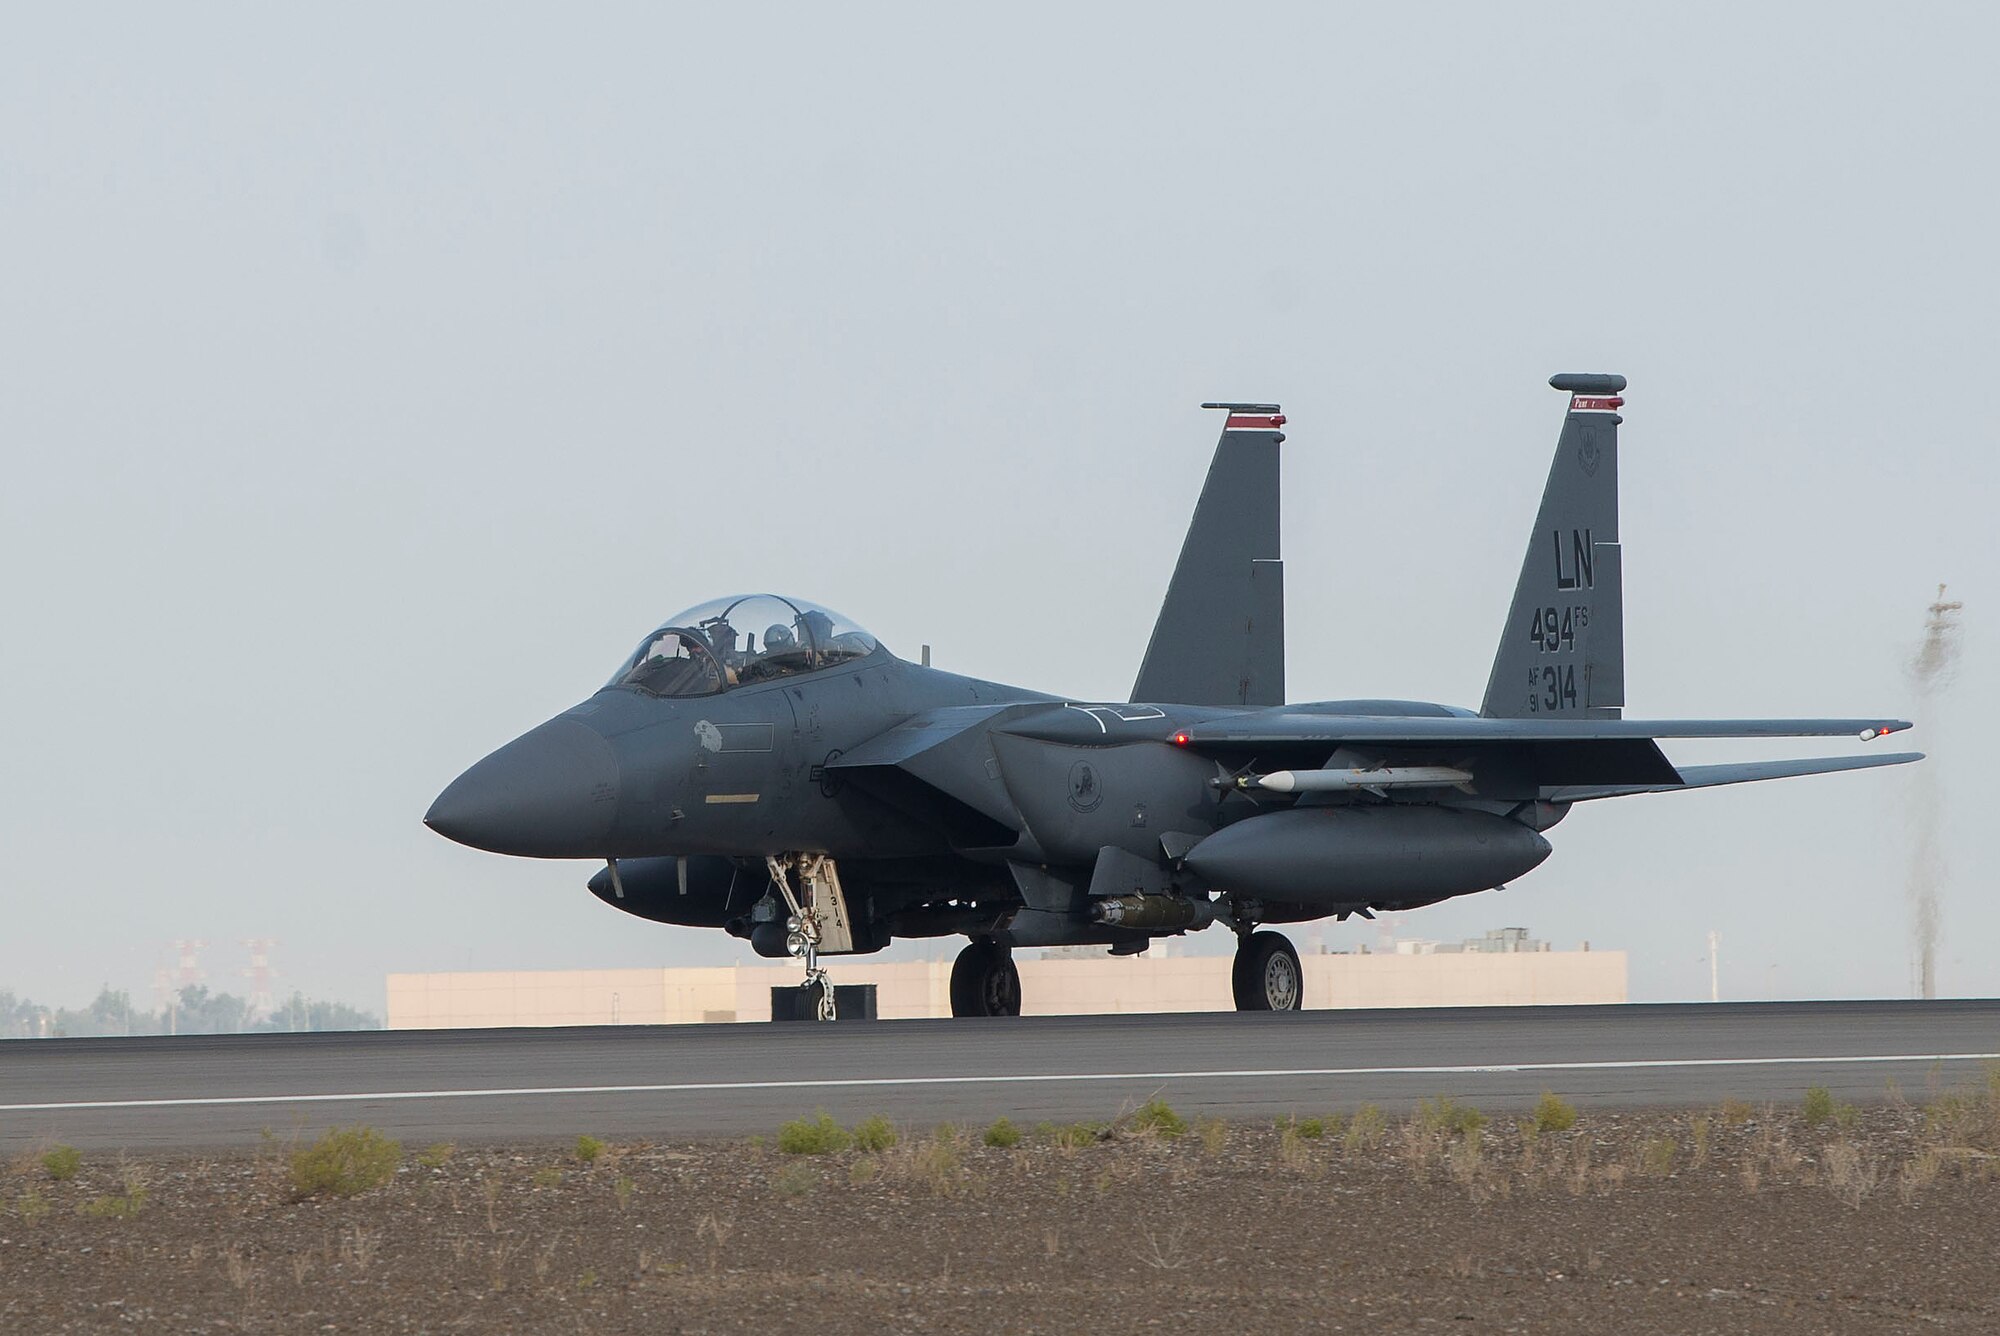 A U.S. Air Force F-15E Strike Eagle piloted by a member of the 494th Expeditionary Fighter Squadron (EFS) taxis on the flightline prior to takeoff at Al Dhafra Air Base (ADAB), United Arab Emirates, April 30, 2021.